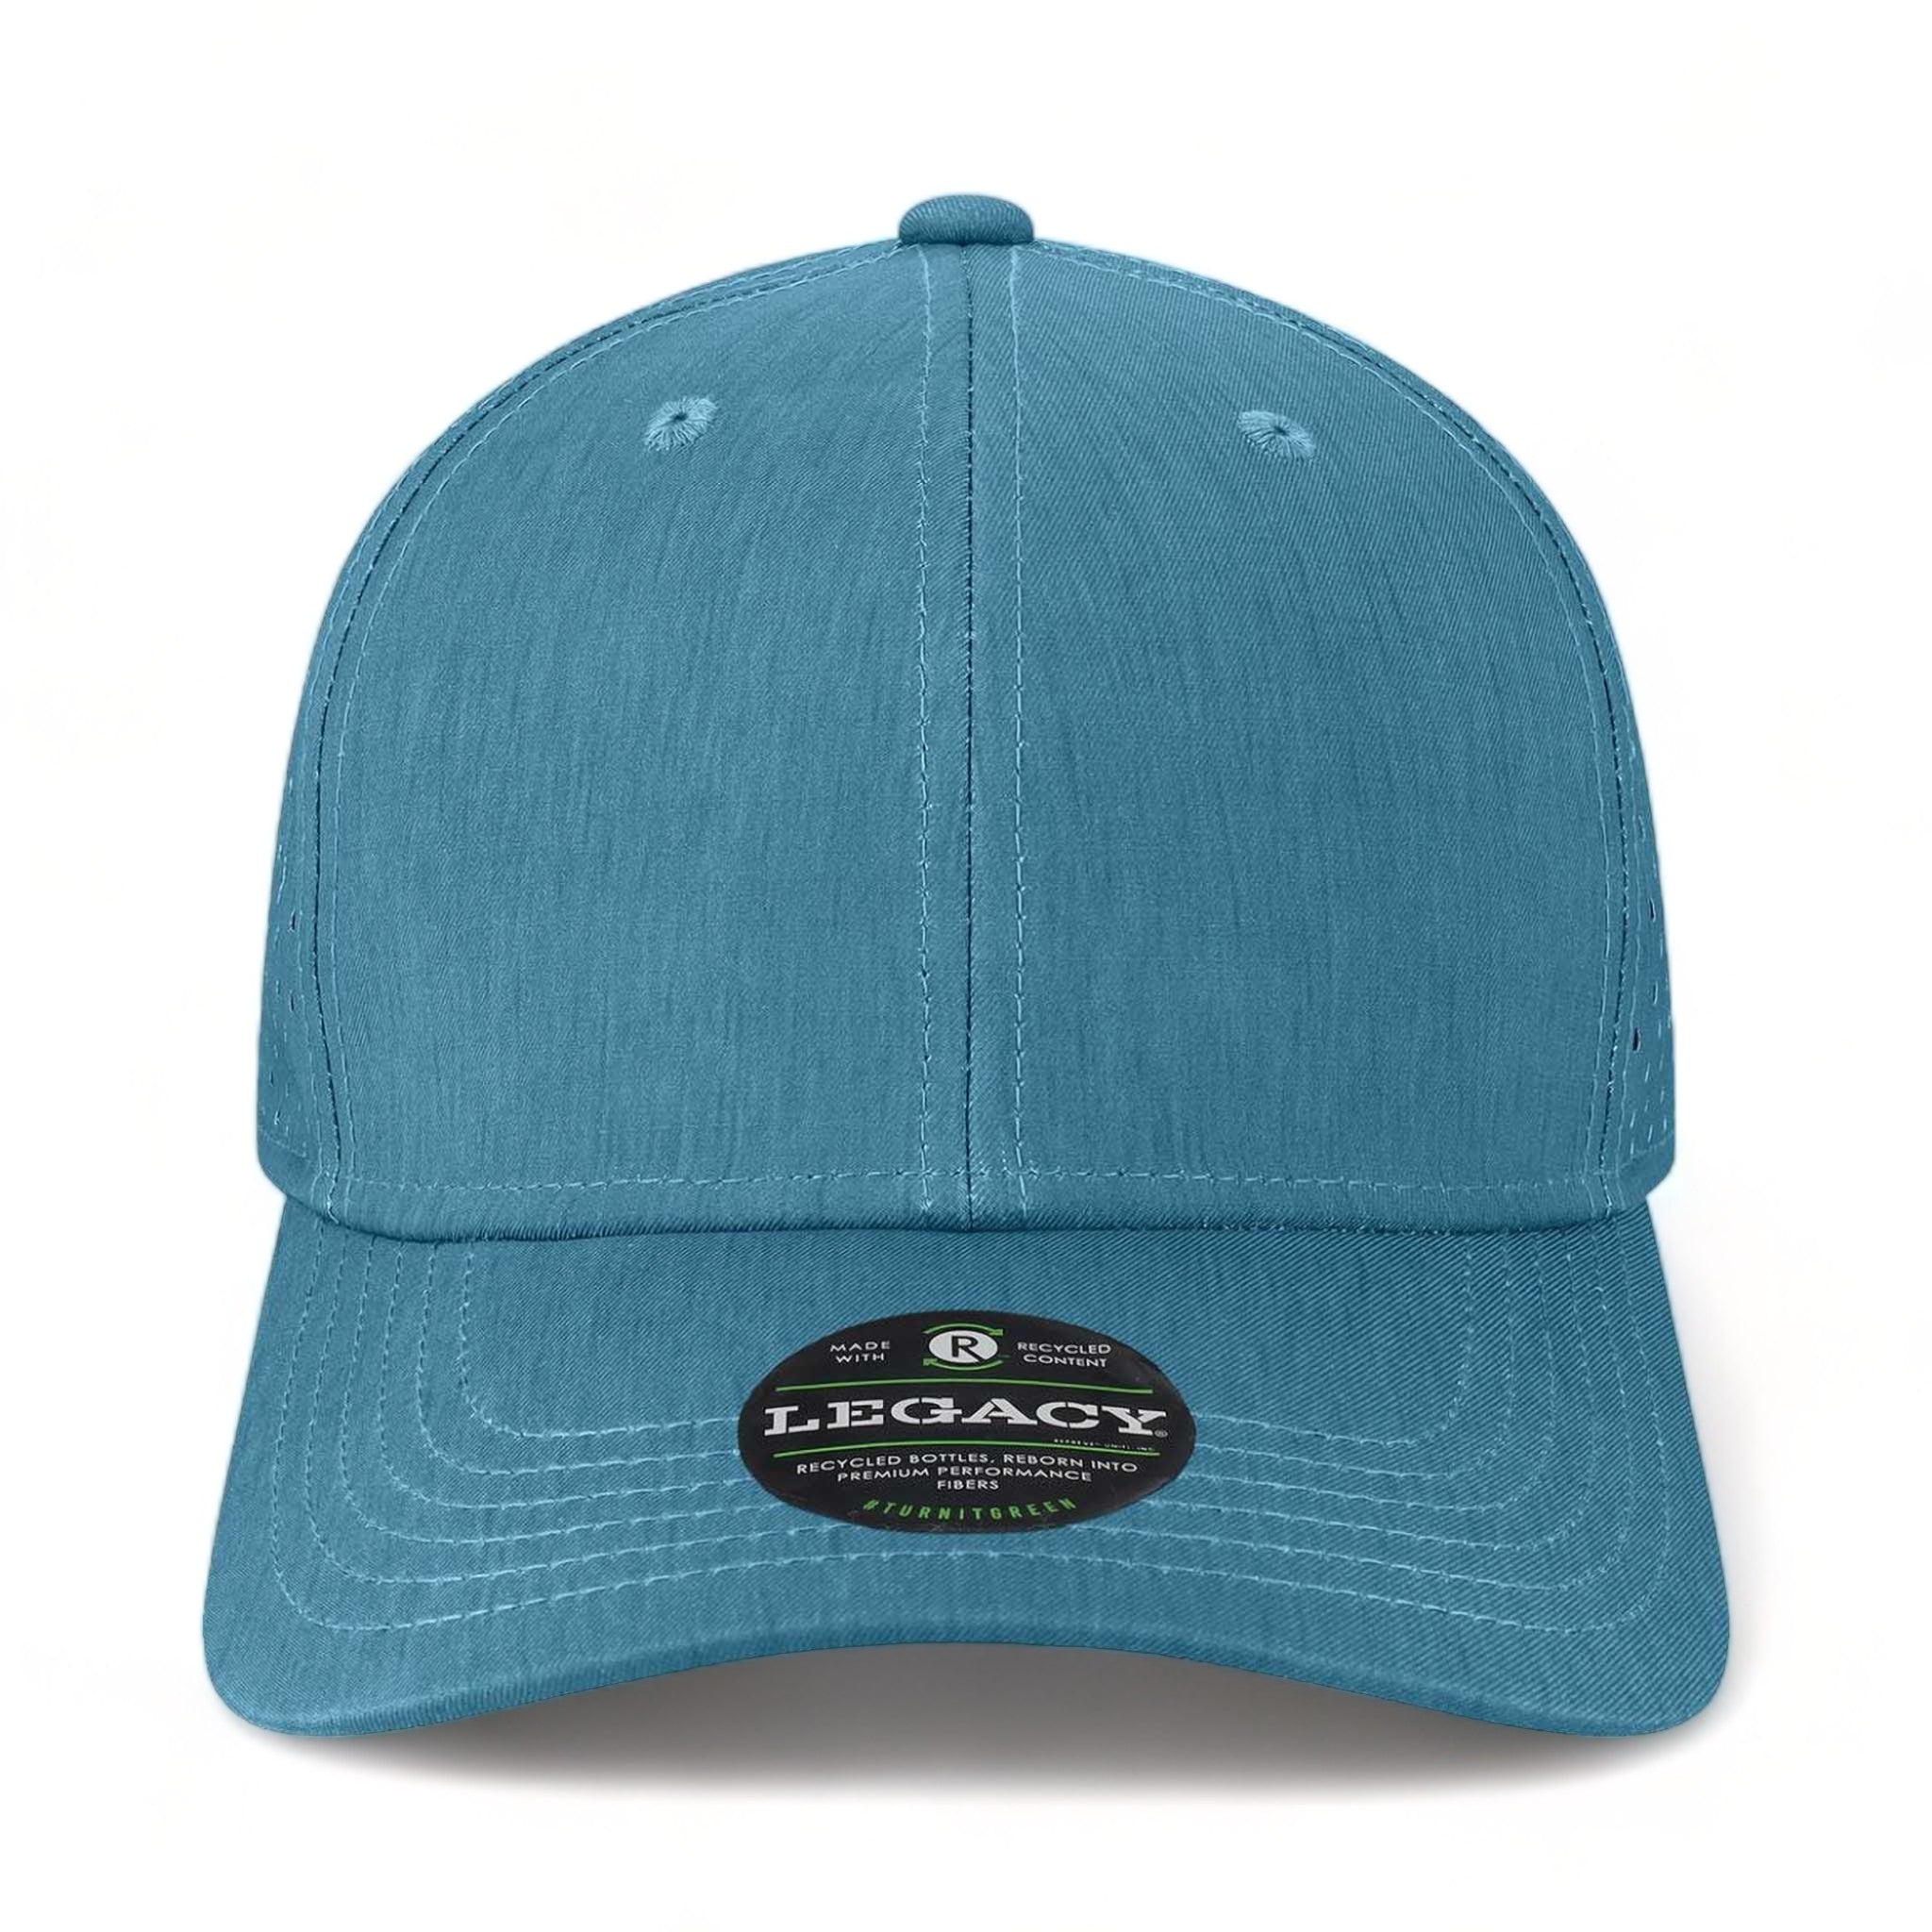 Front view of LEGACY REMPA custom hat in eco marine blue